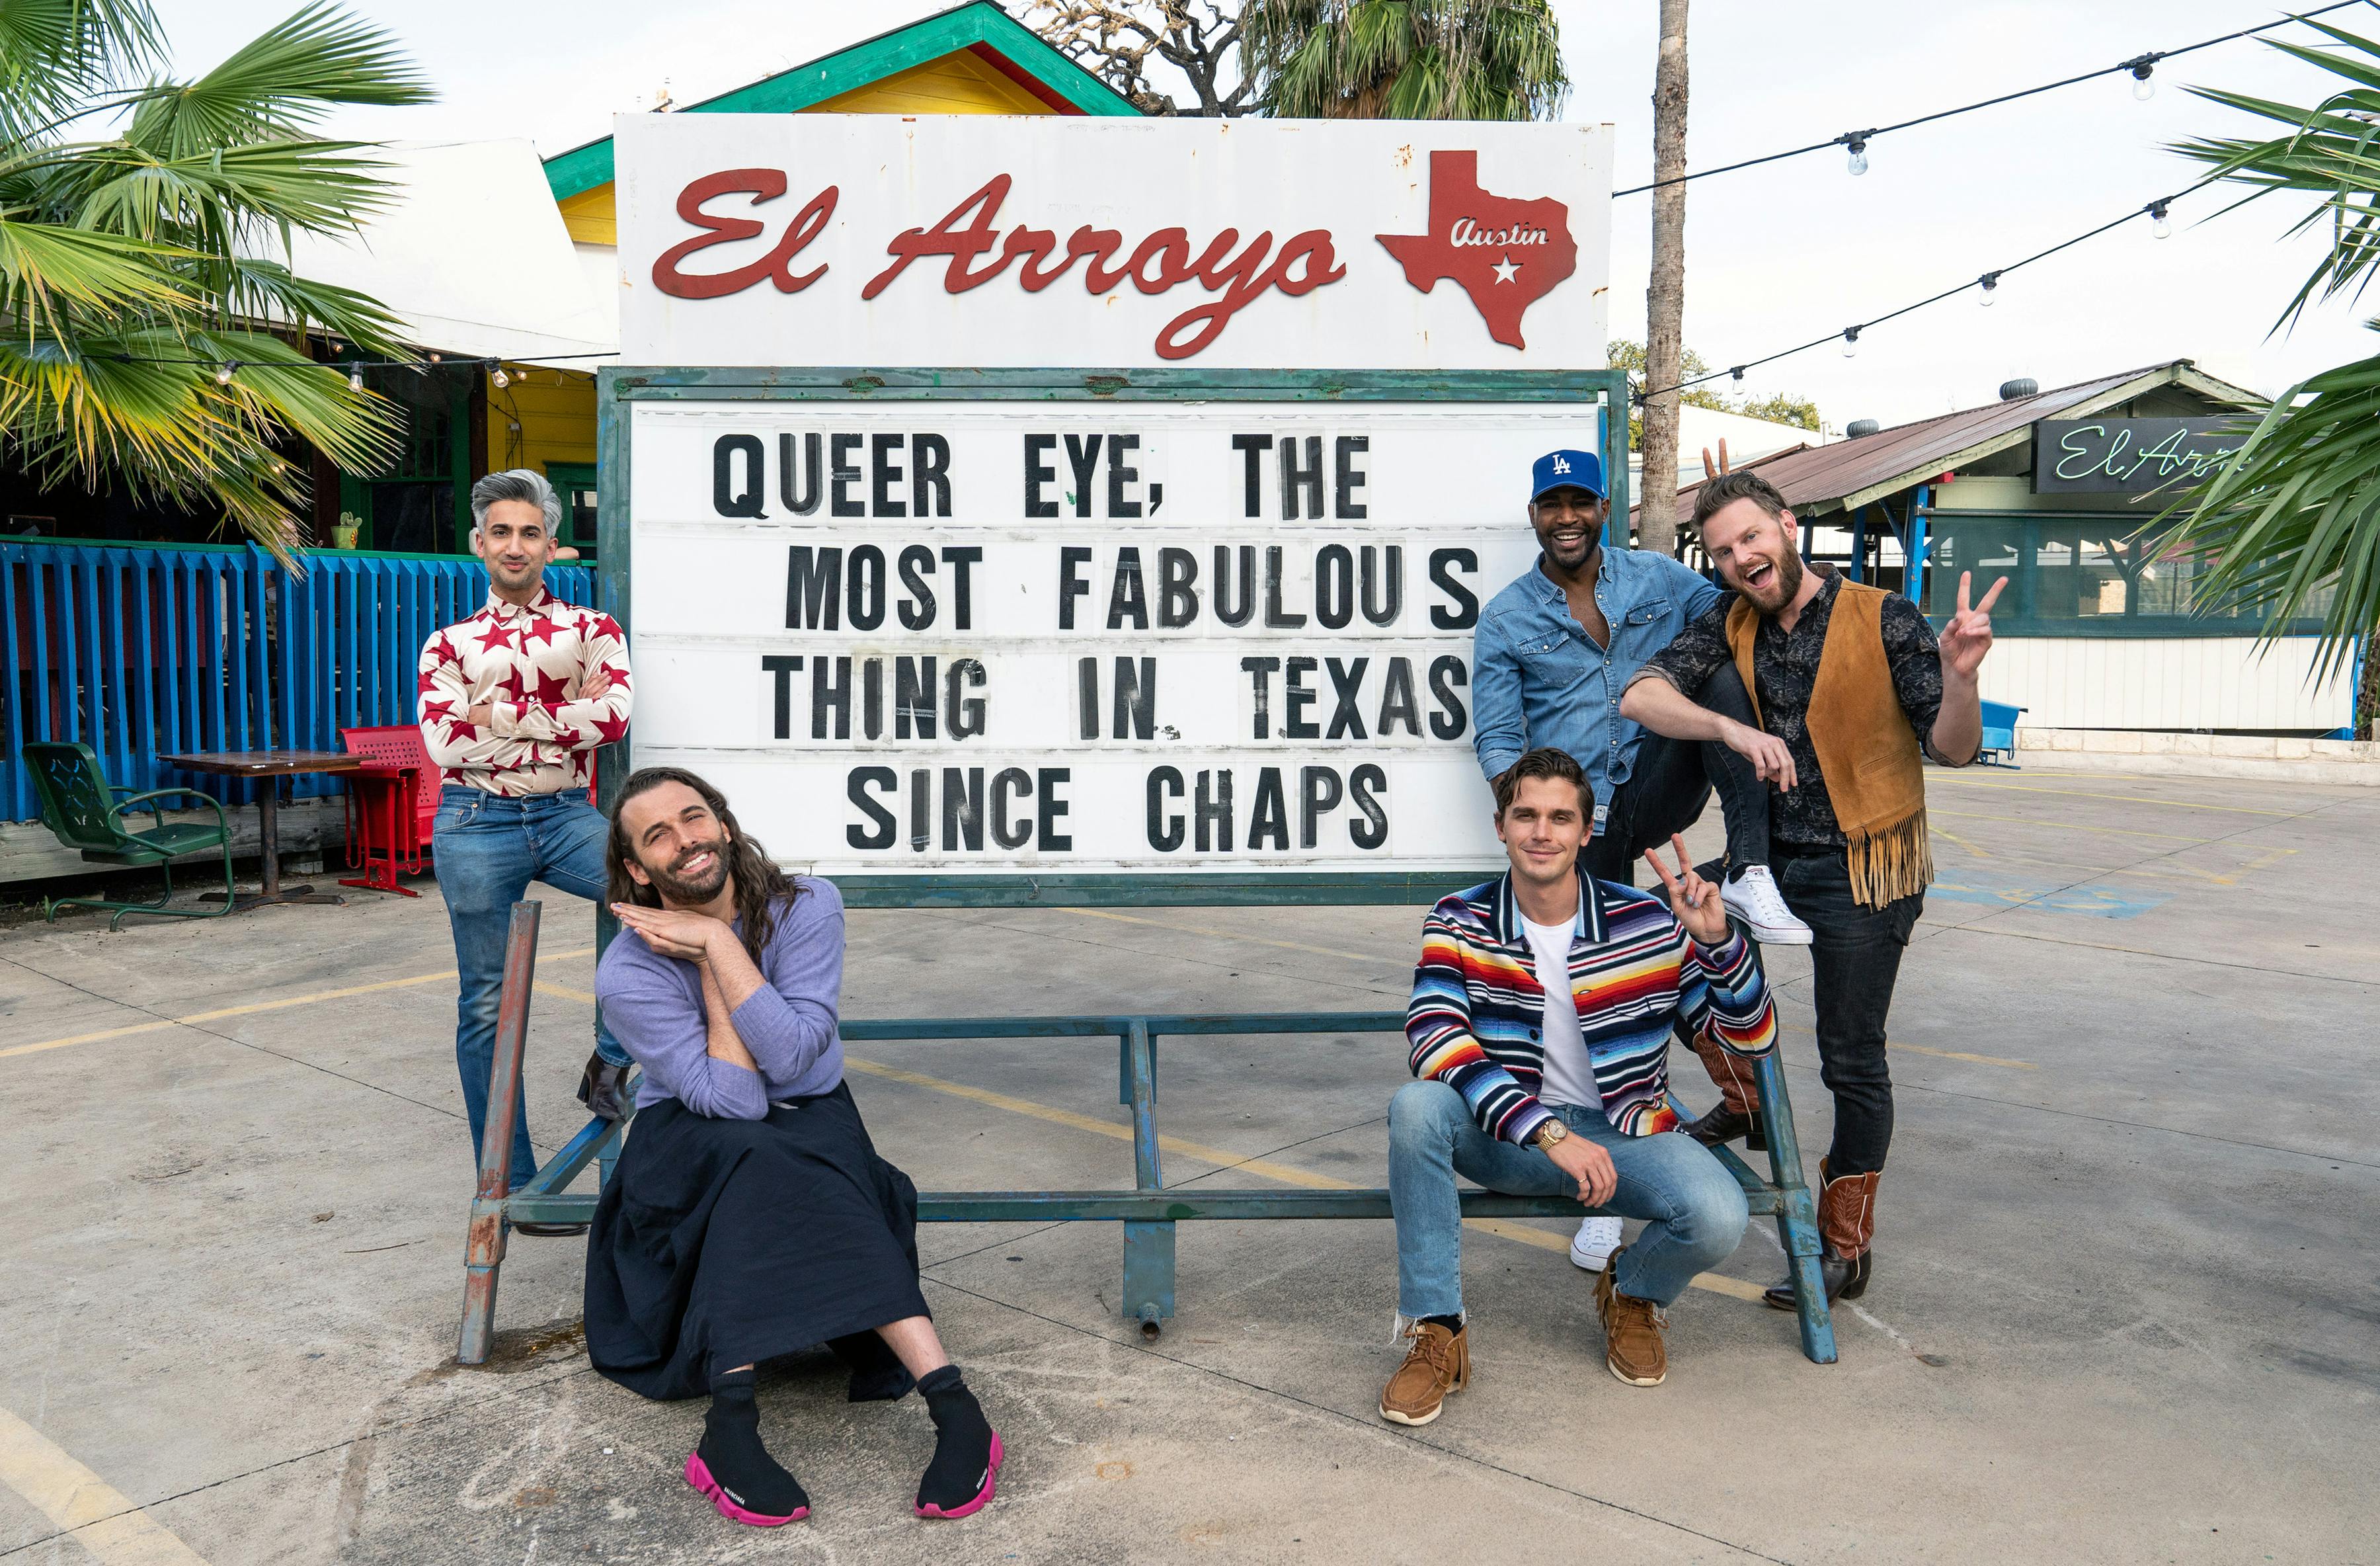 The Fab Five frame a sign that reads "Queer Eye, the most fabulous thing in texas since chaps."